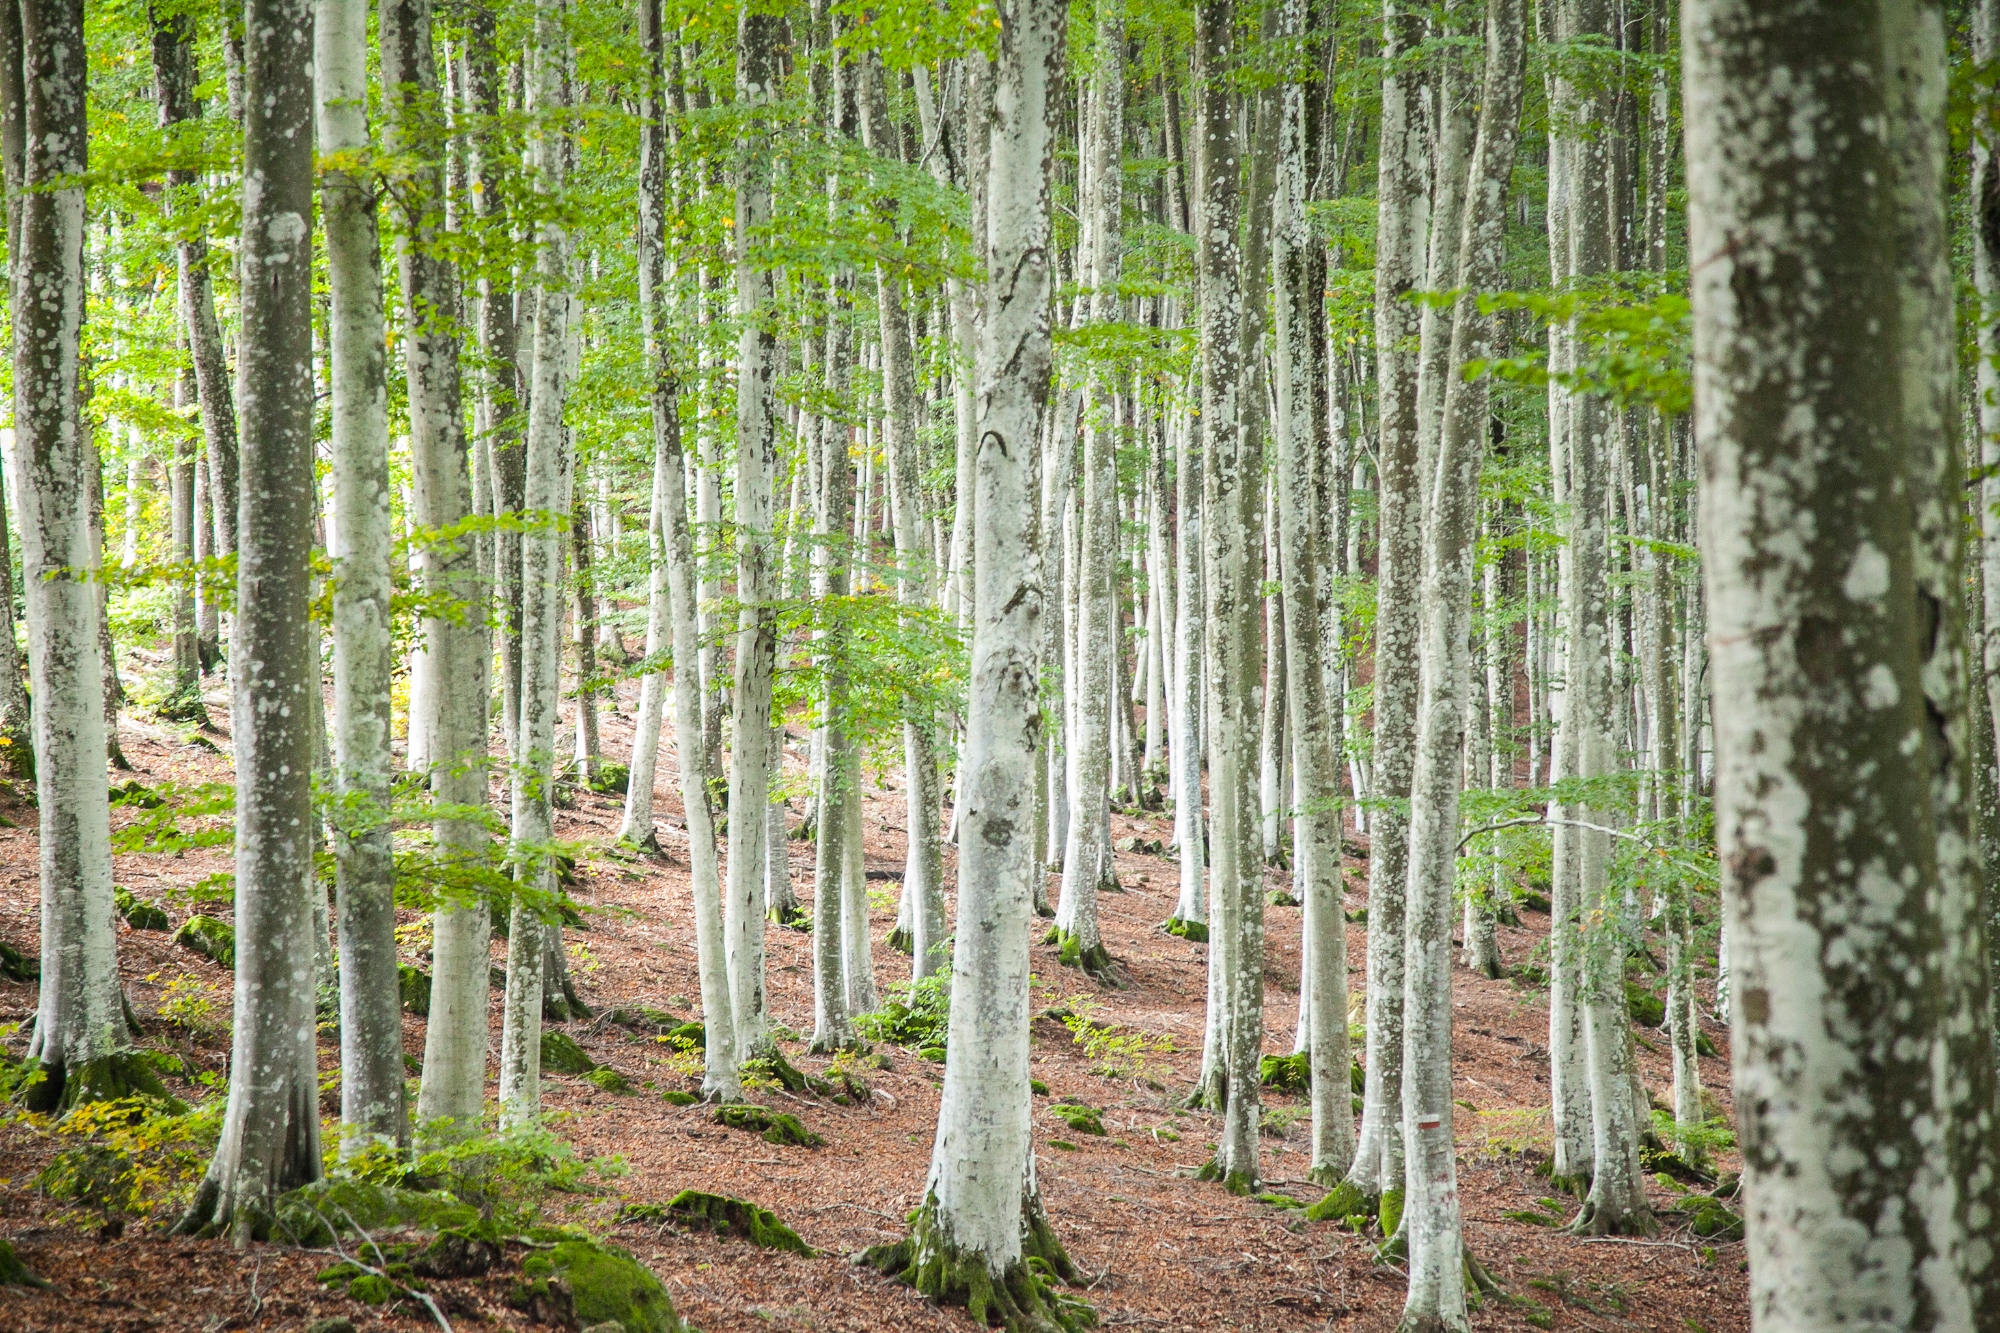 The beech forest of Monte Amiata